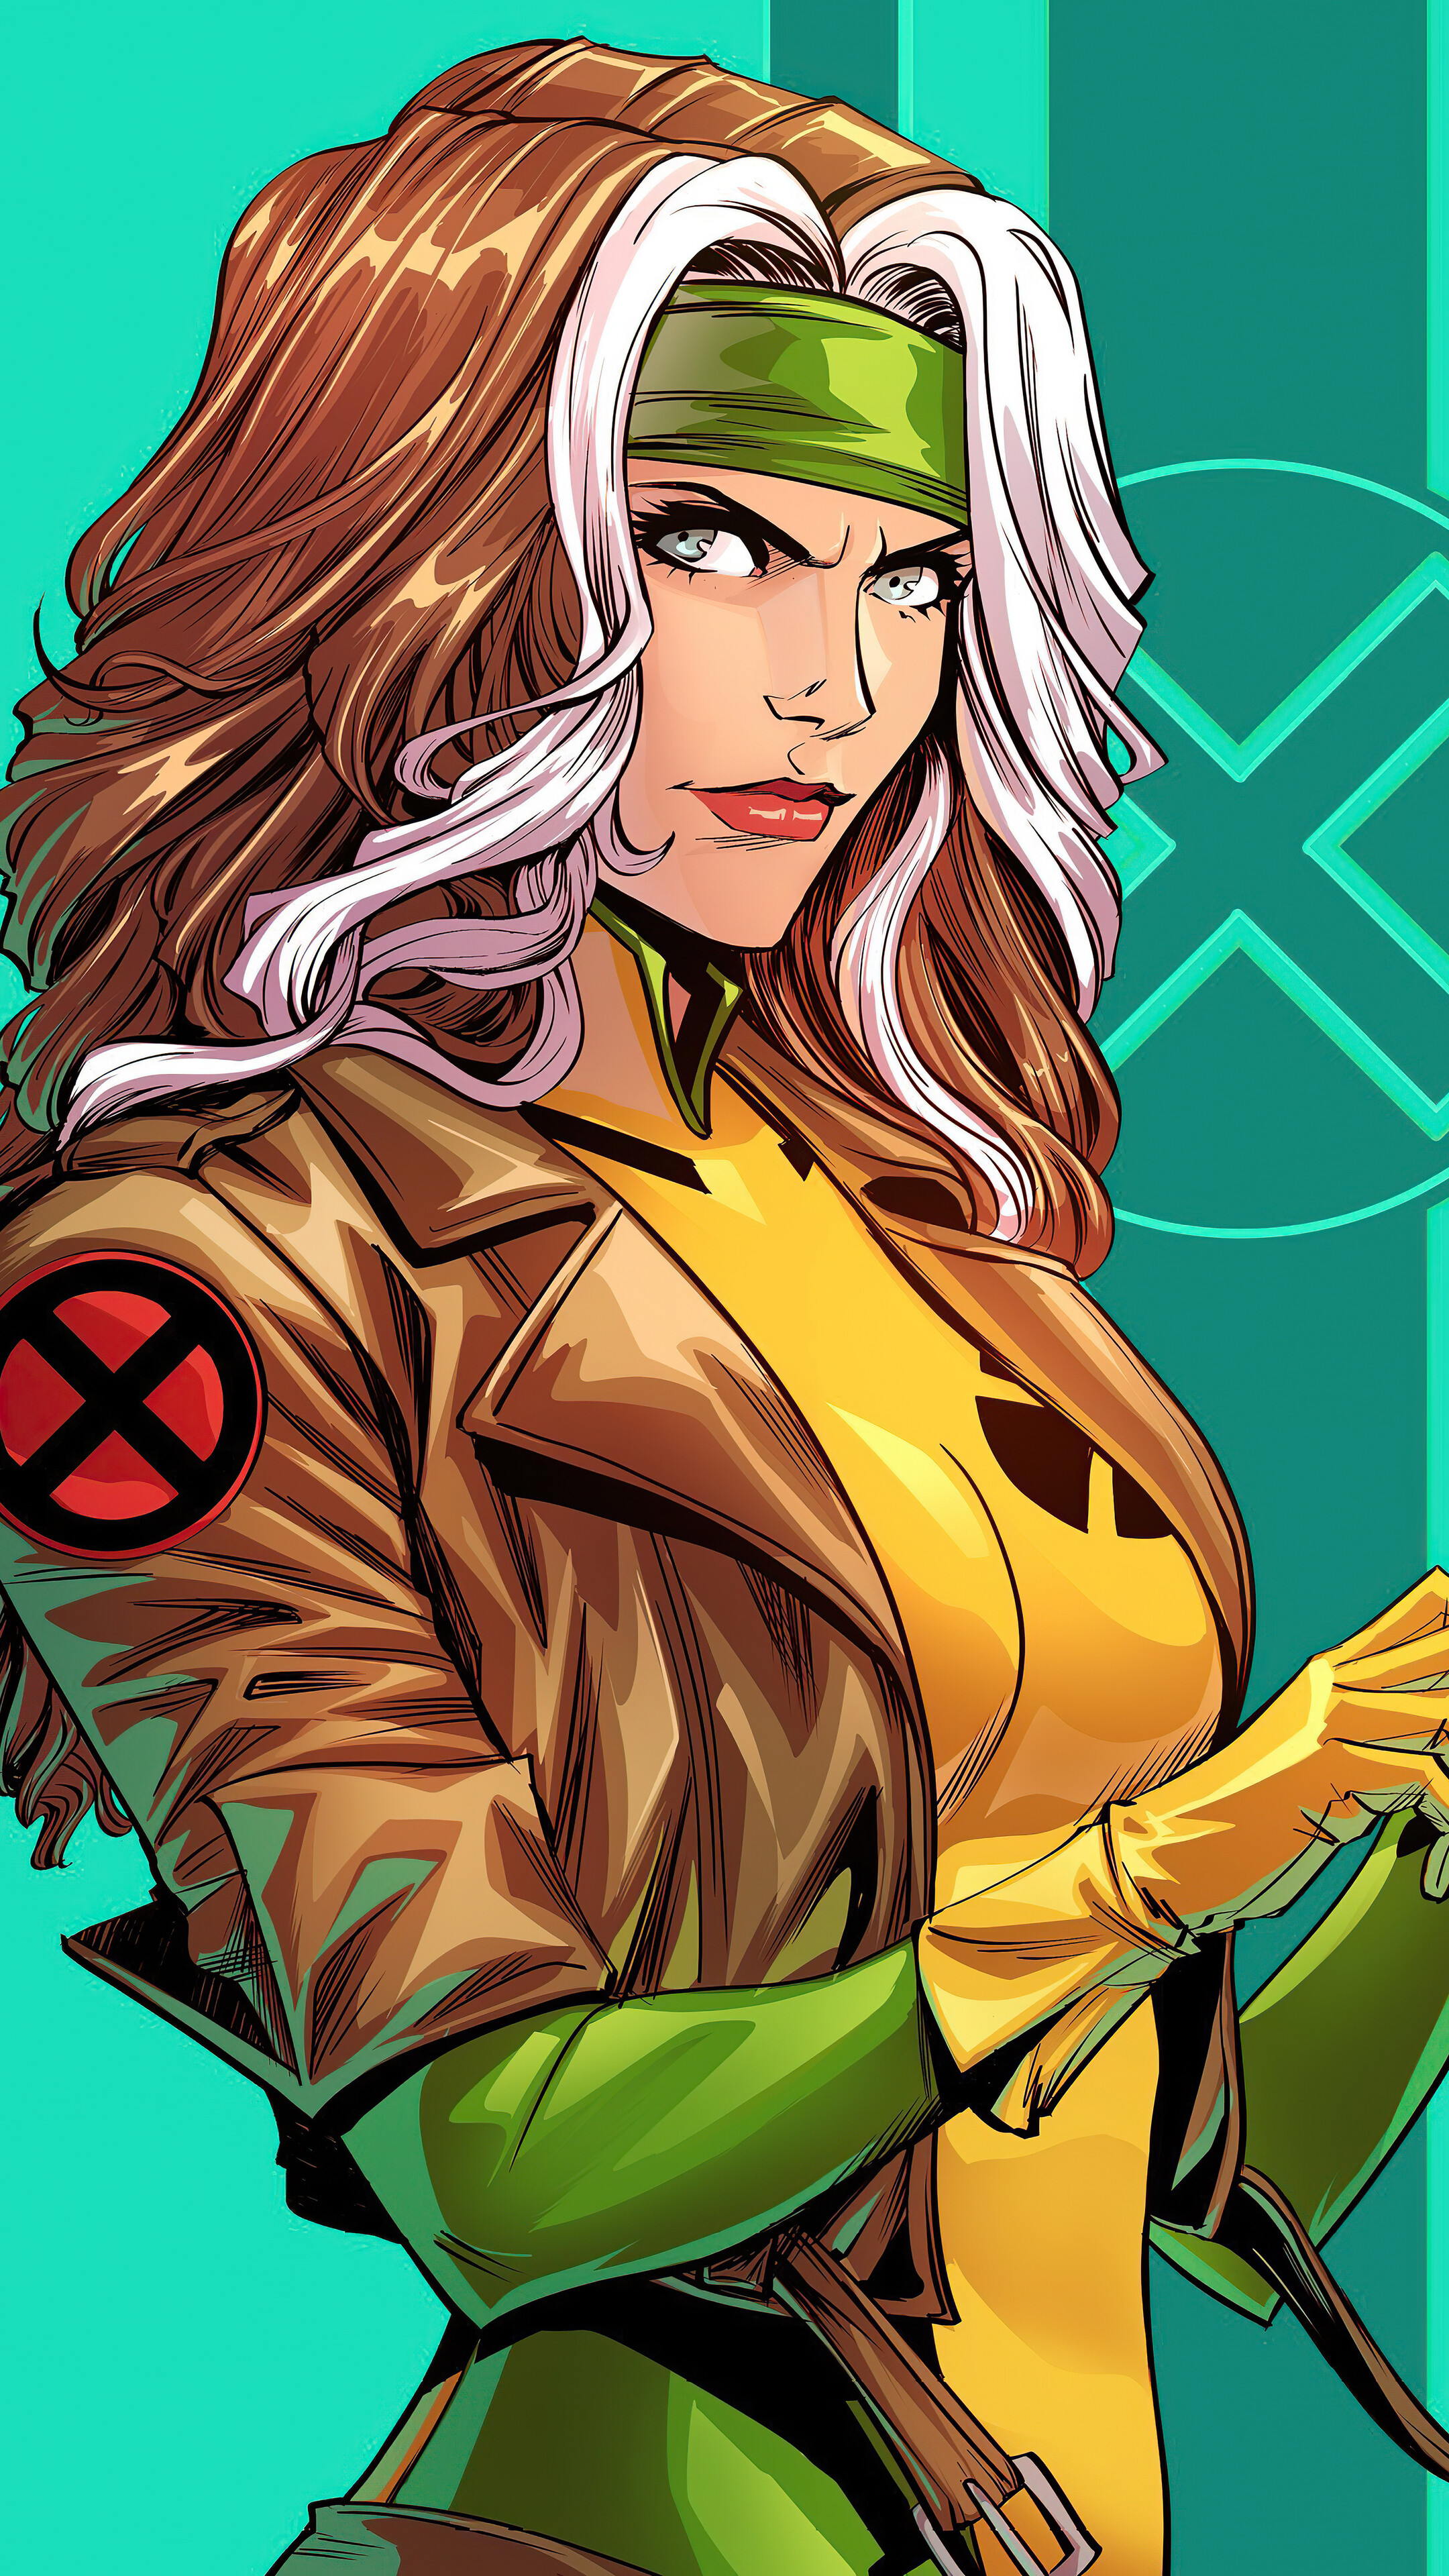 Rogue (Marvel): A character appearing in American comic books published by Marvel Comics, mostly in association with the X-Men. 2160x3840 4K Background.